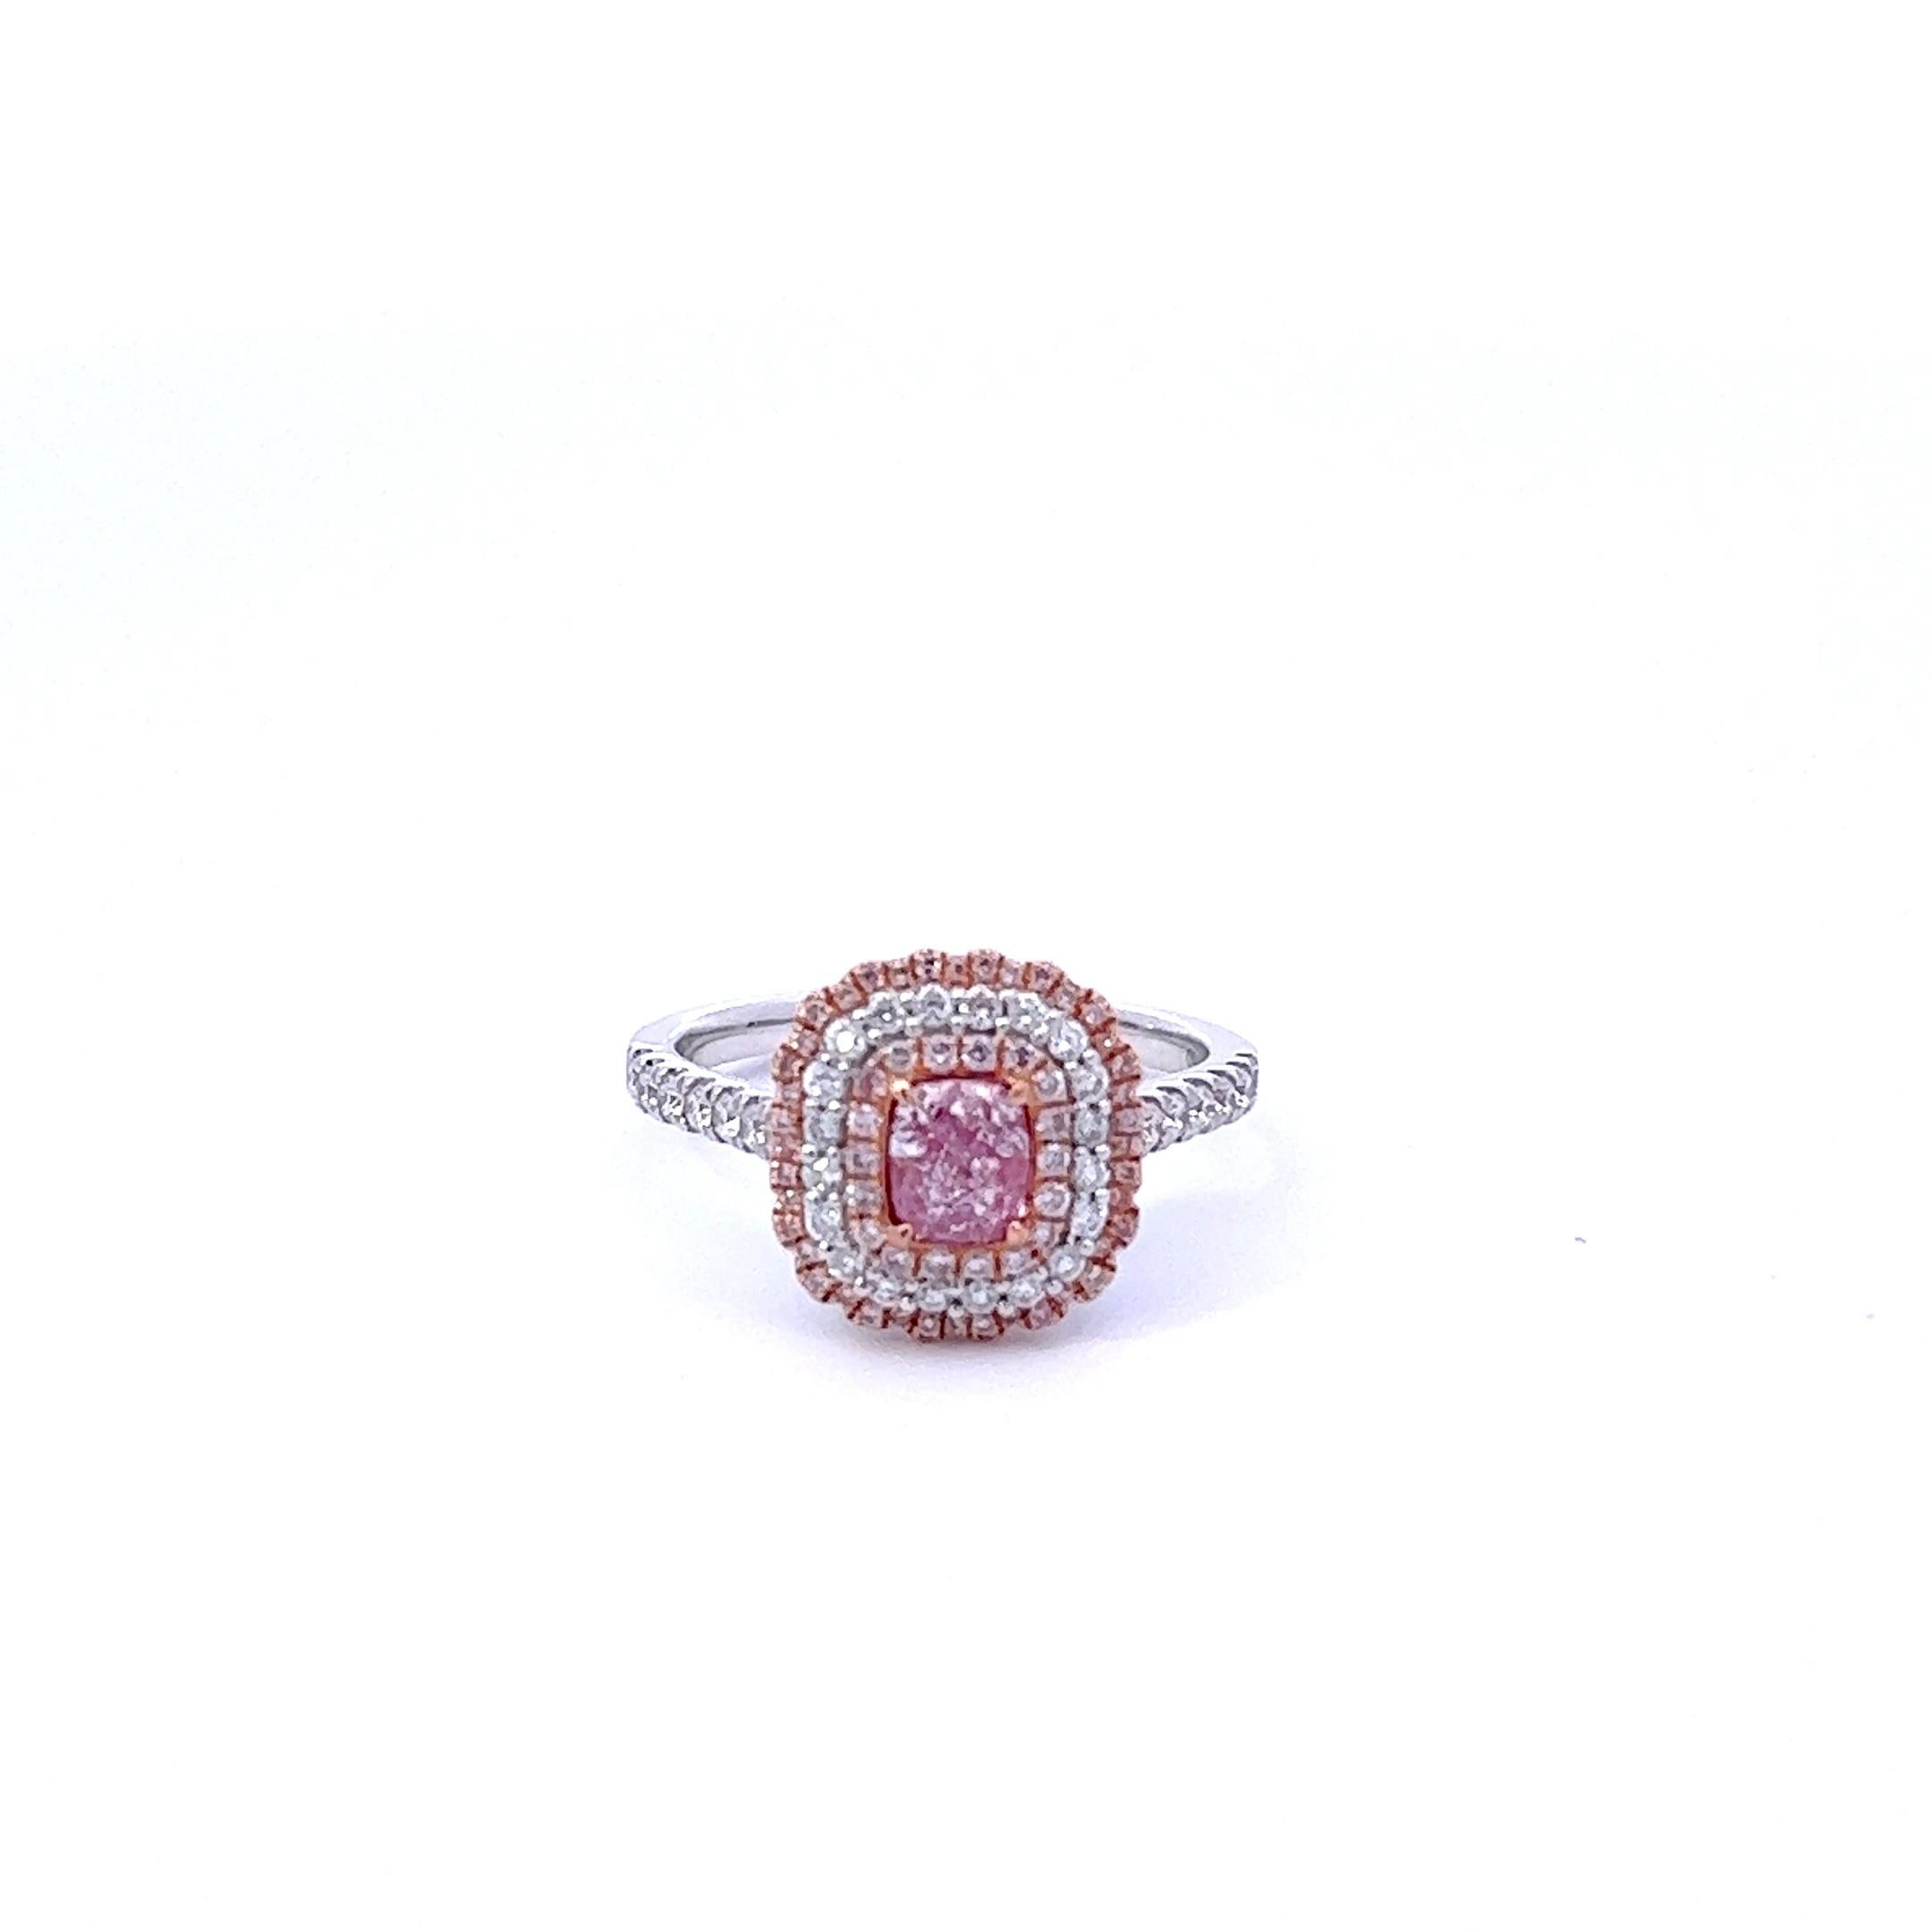 Center: 0.53ct Very Light Pink Cushion SI2 GIA# 5363571627
Setting: 18k White Gold 0.49ctw Pink and White Diamonds

An extremely rare and stunning natural pink diamond center. Pink Diamonds account for less than 0.01% of all diamonds mined in the